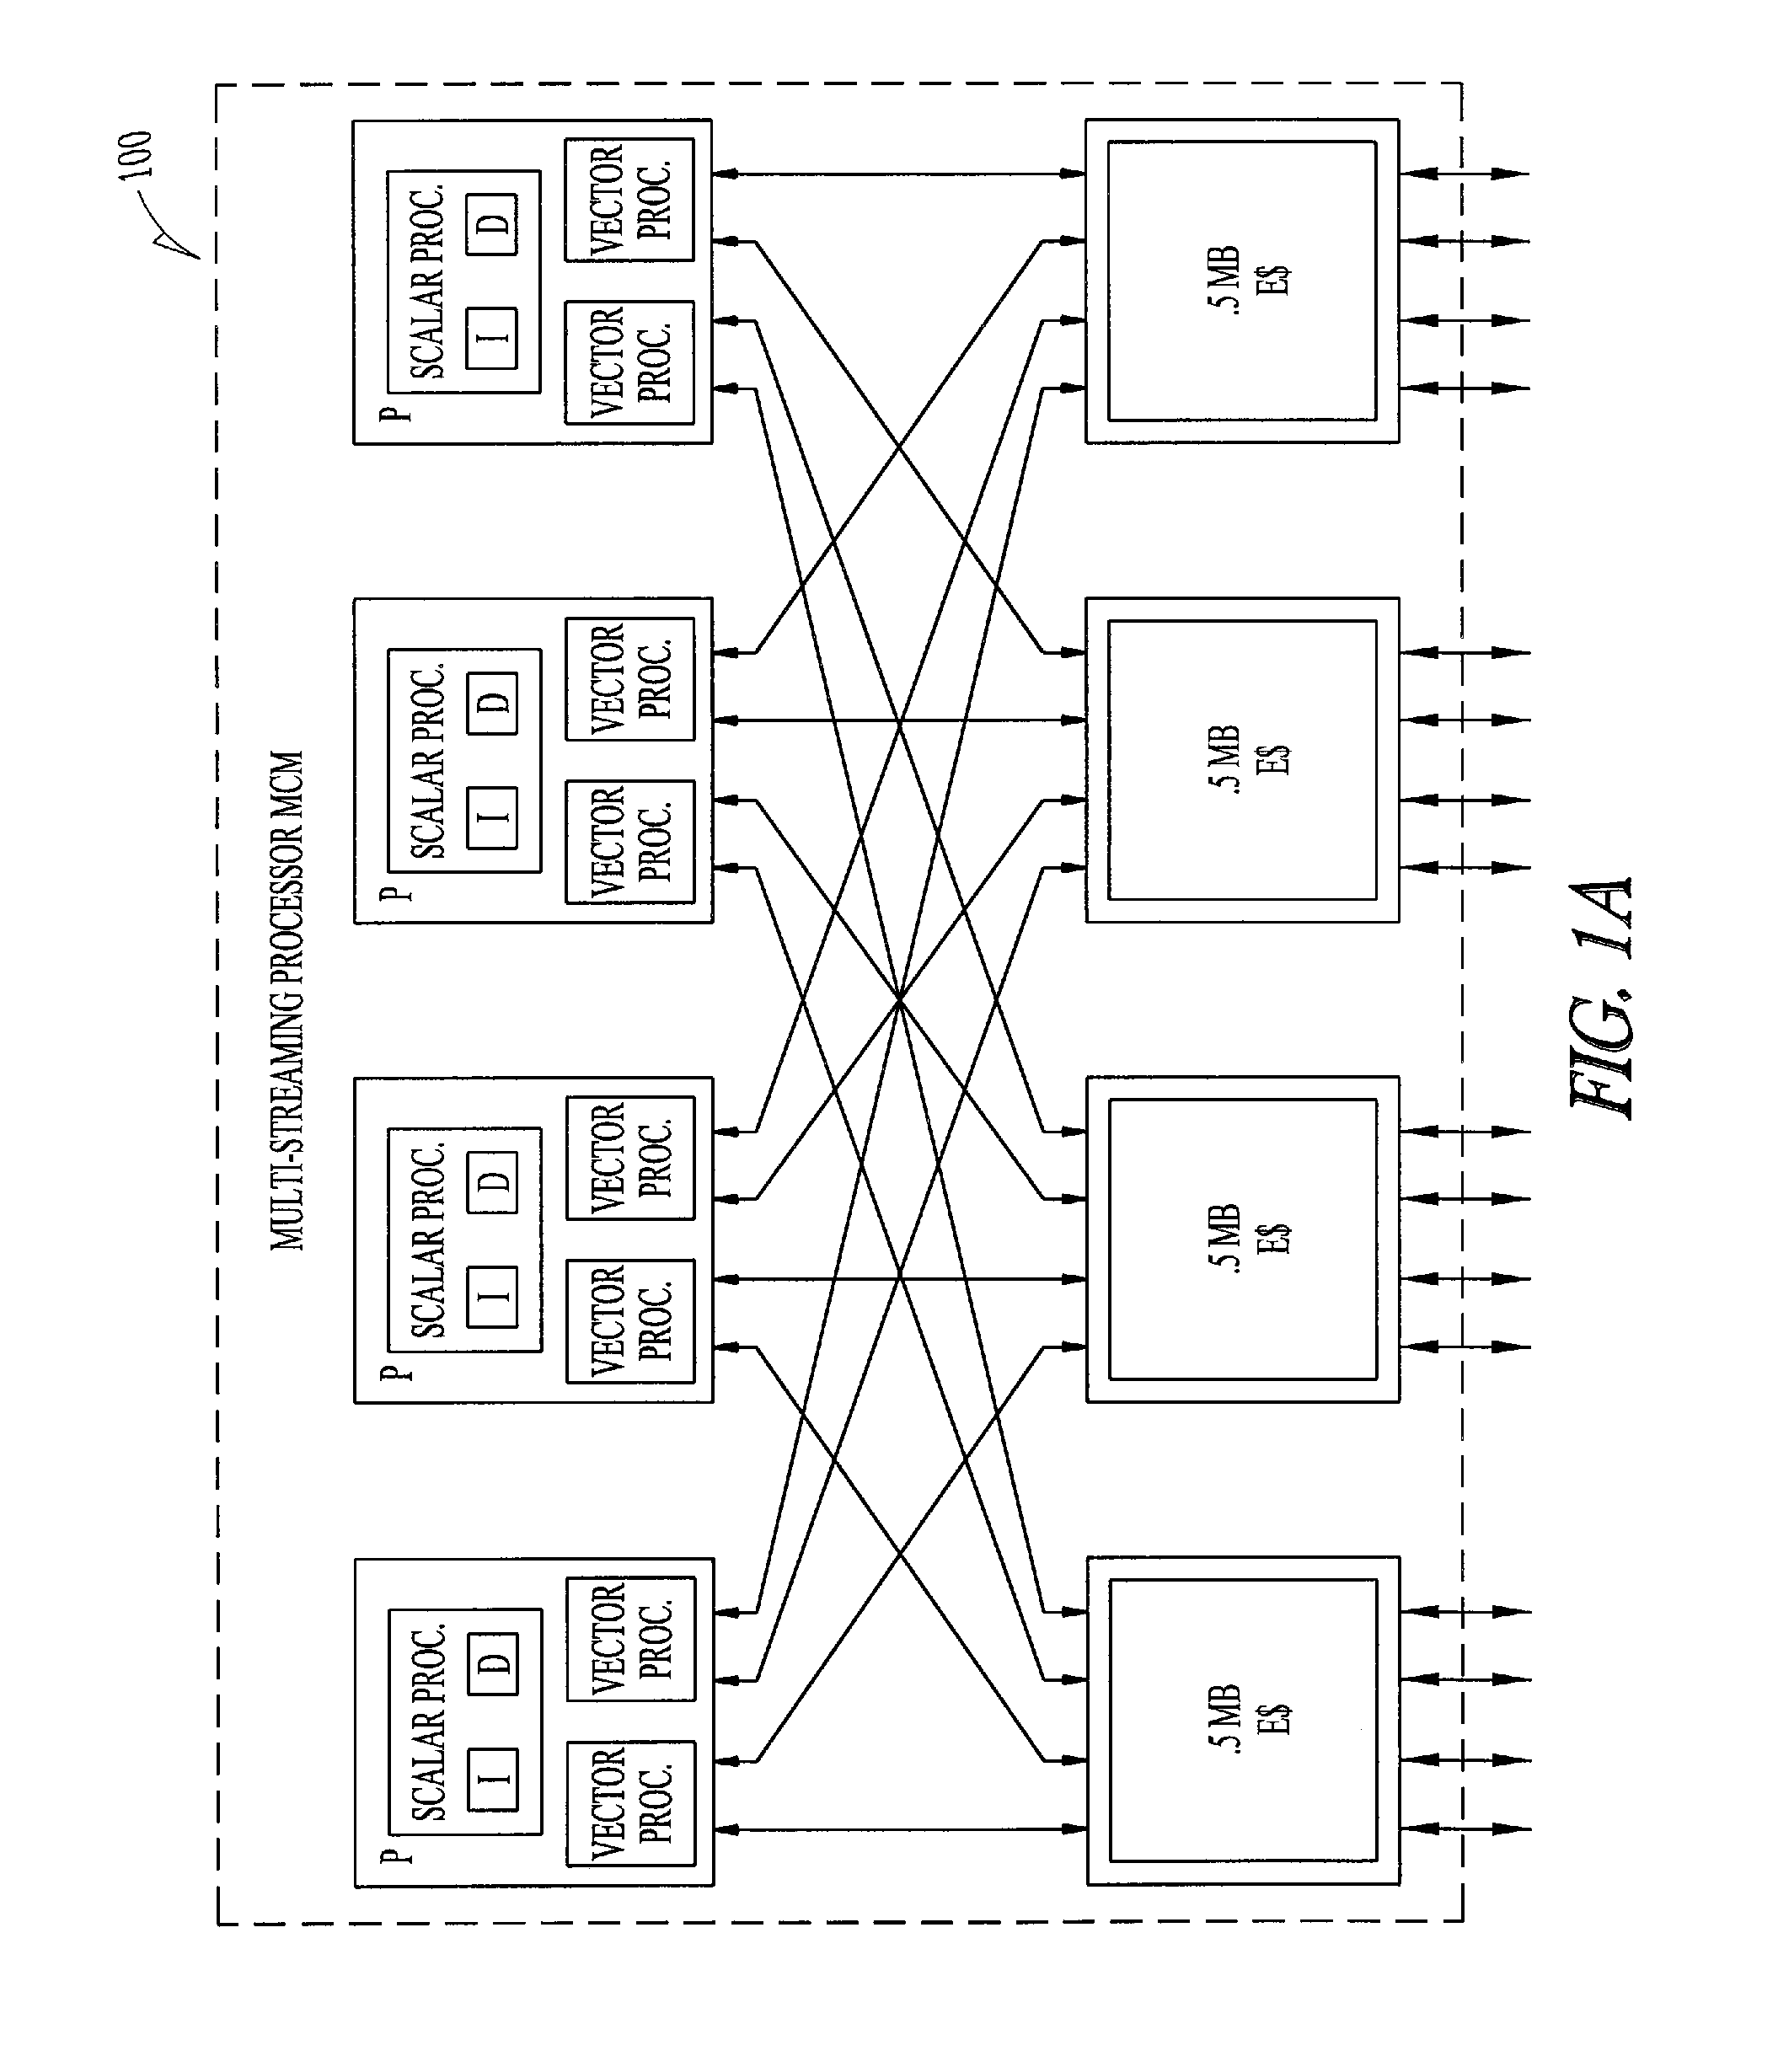 System and method for processing memory instructions using a forced order queue